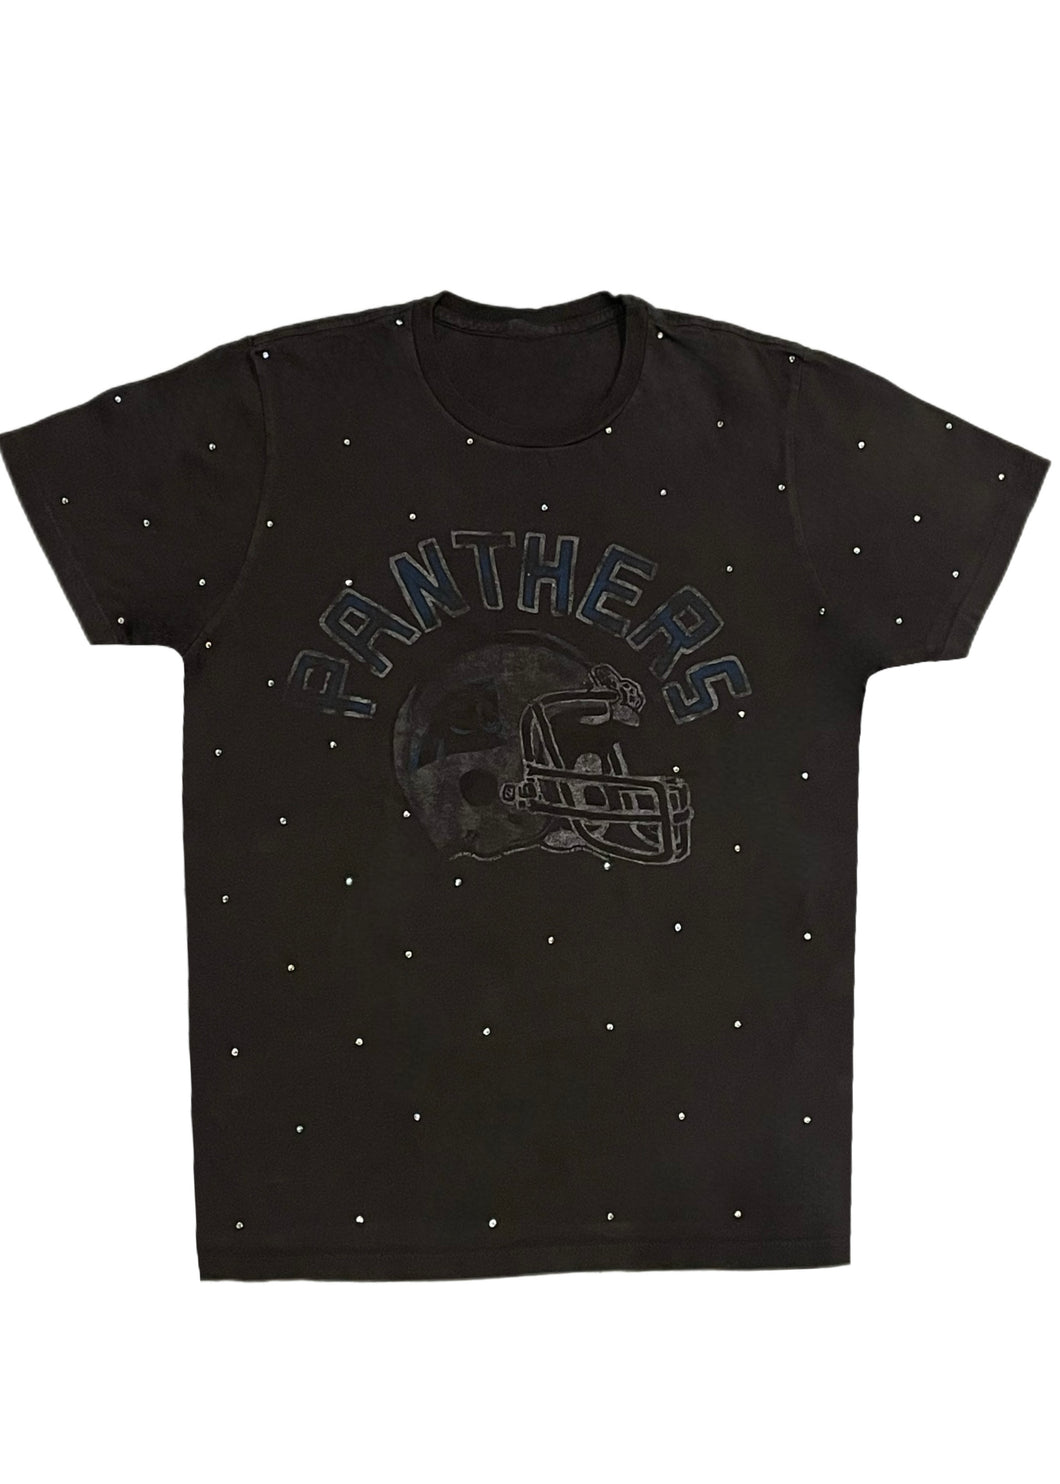 Carolina Panthers, NFL One of a KIND Vintage Soft Tee with Overall Crystal Design